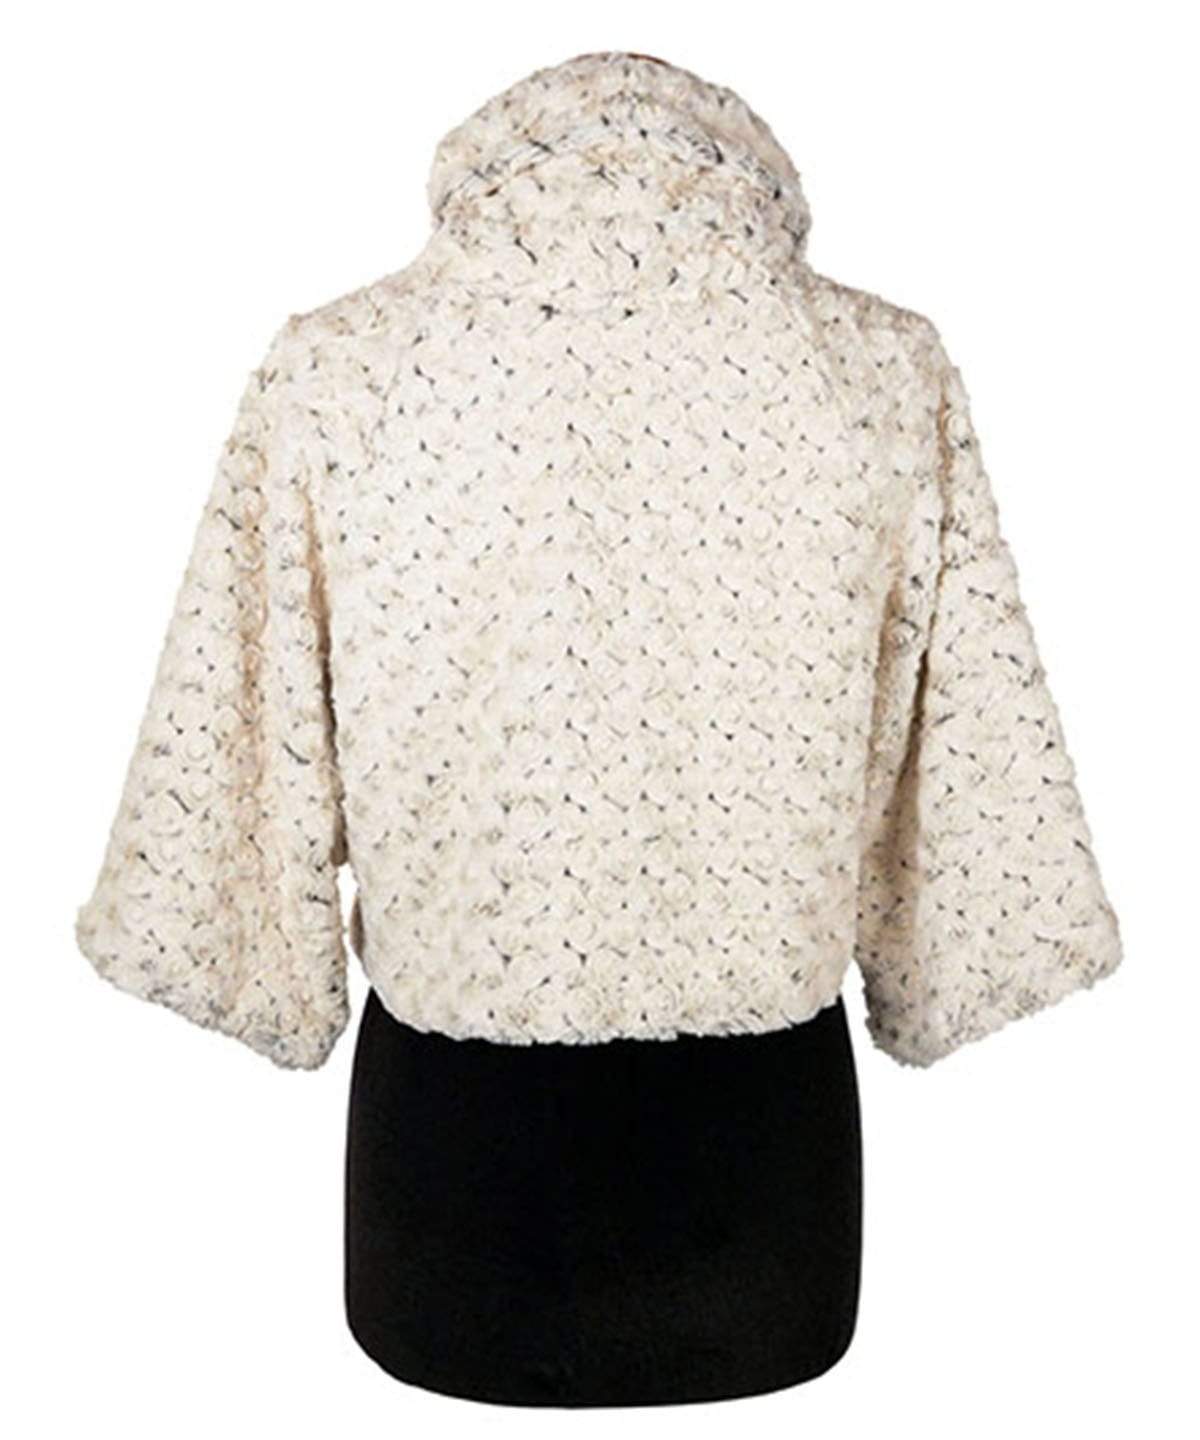 Sweater Top - Rosebud Faux Fur - Sold Out!